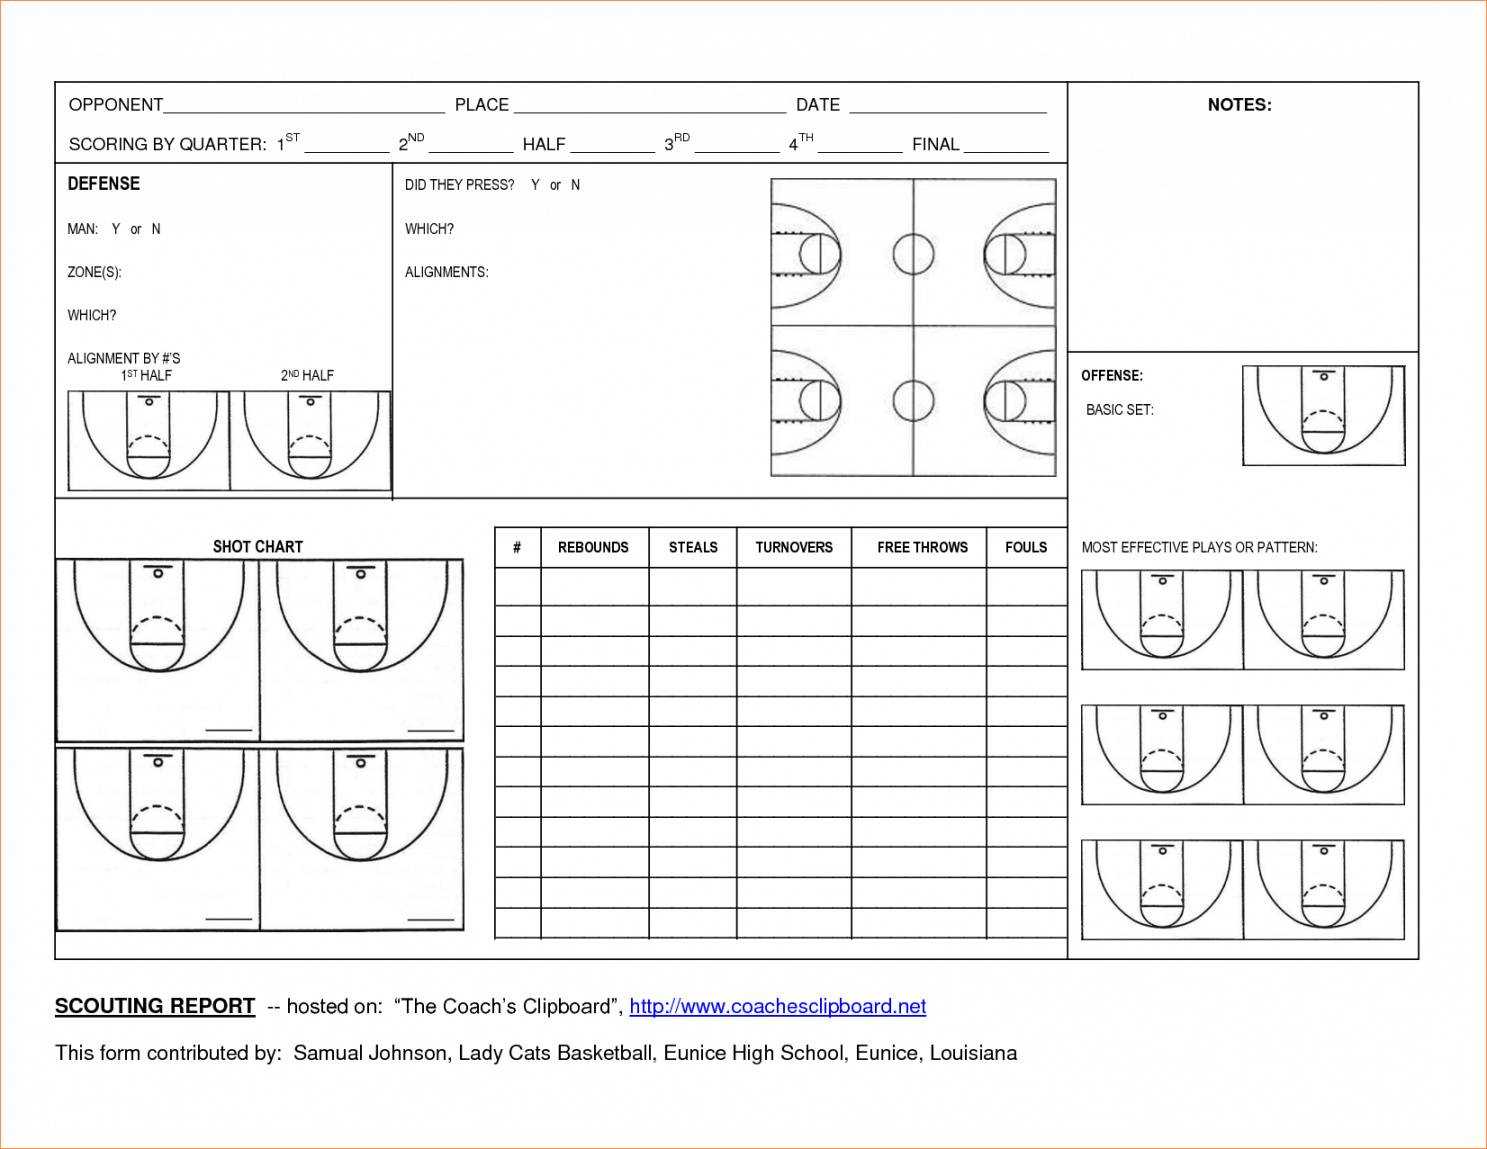 Editable Basketball Scouting Report Template Dltemplates Within Scouting Report Template Basketball